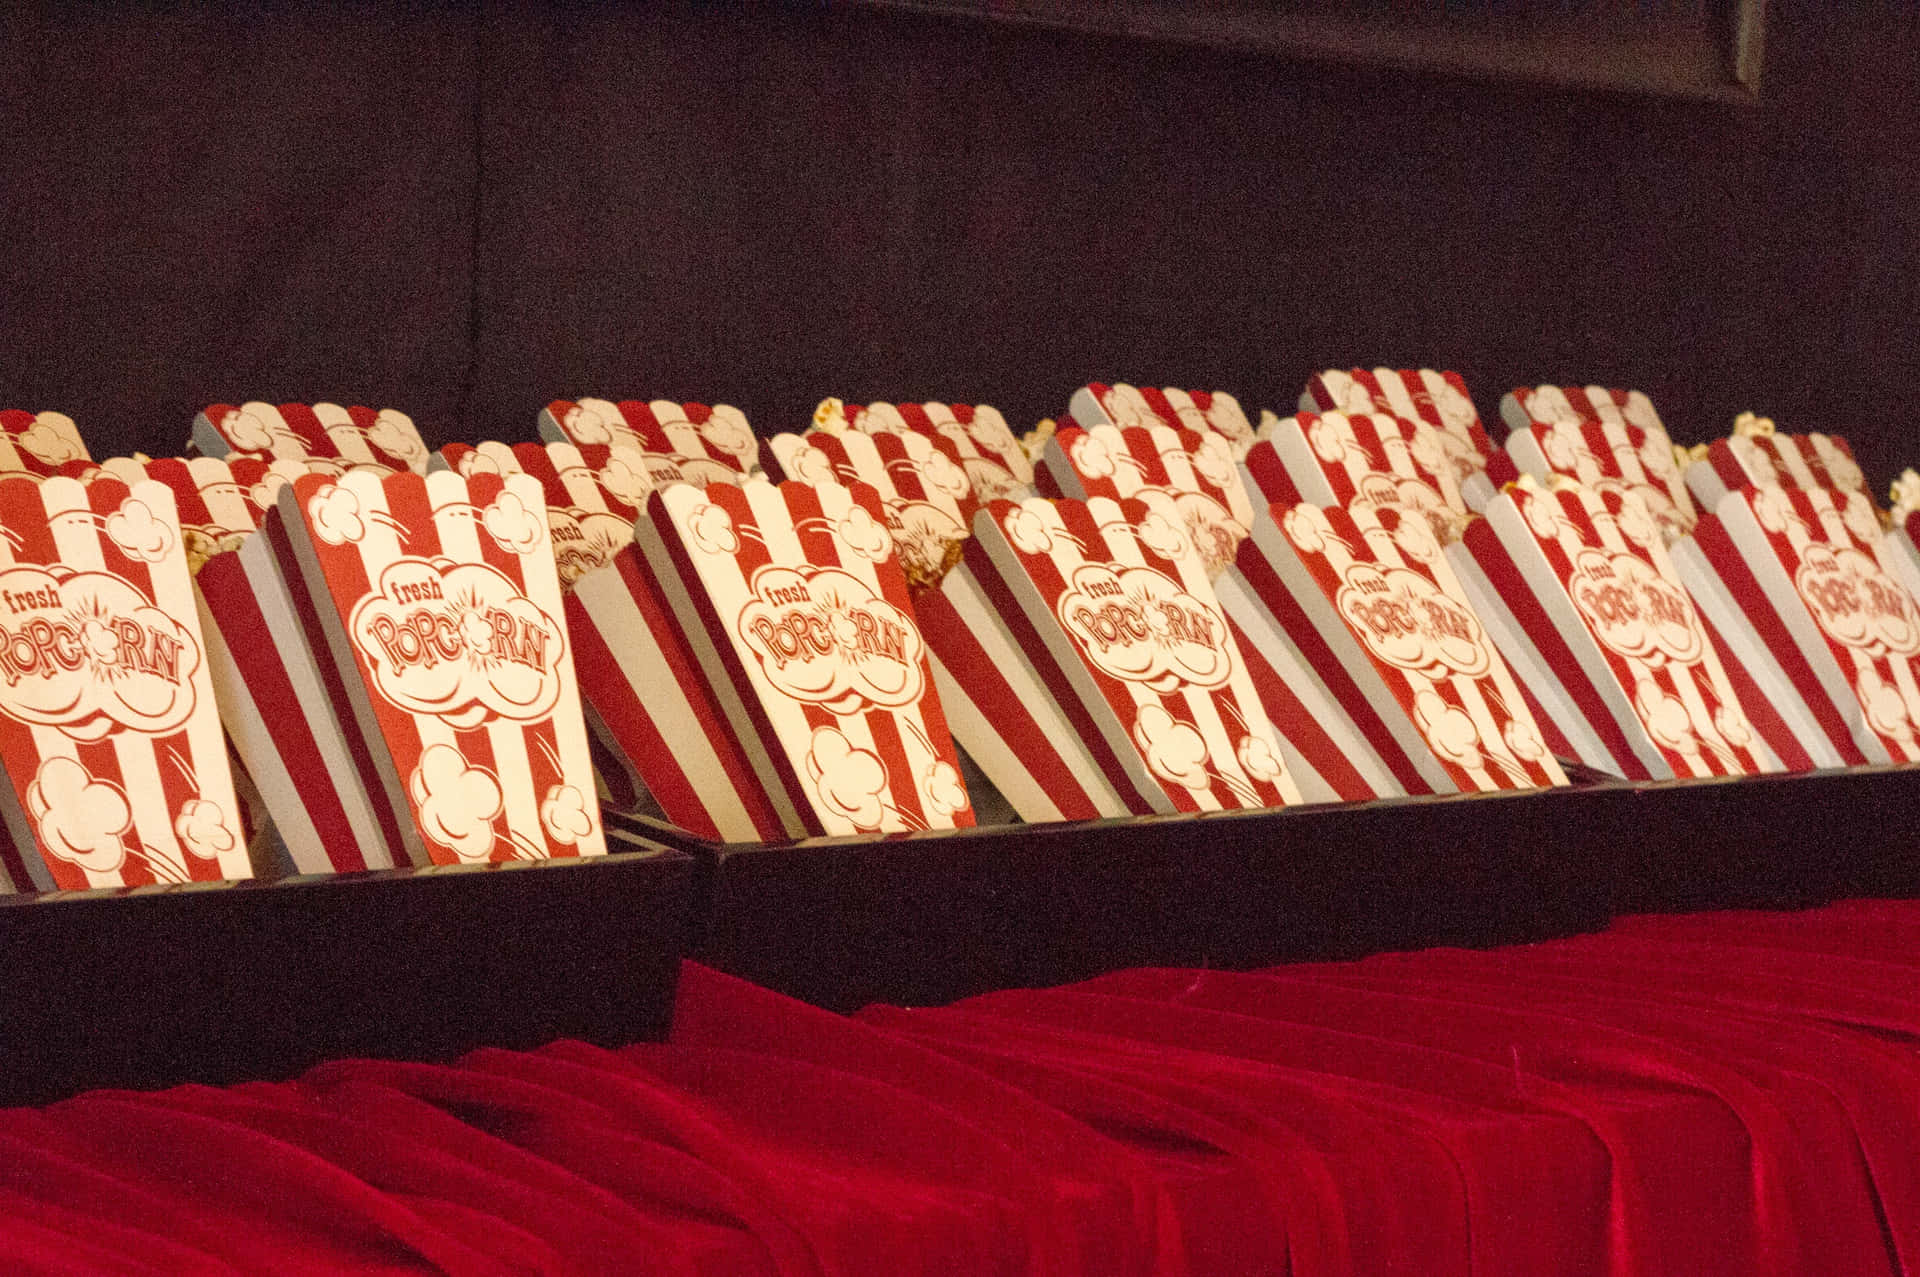 A Red And White Popcorn Box